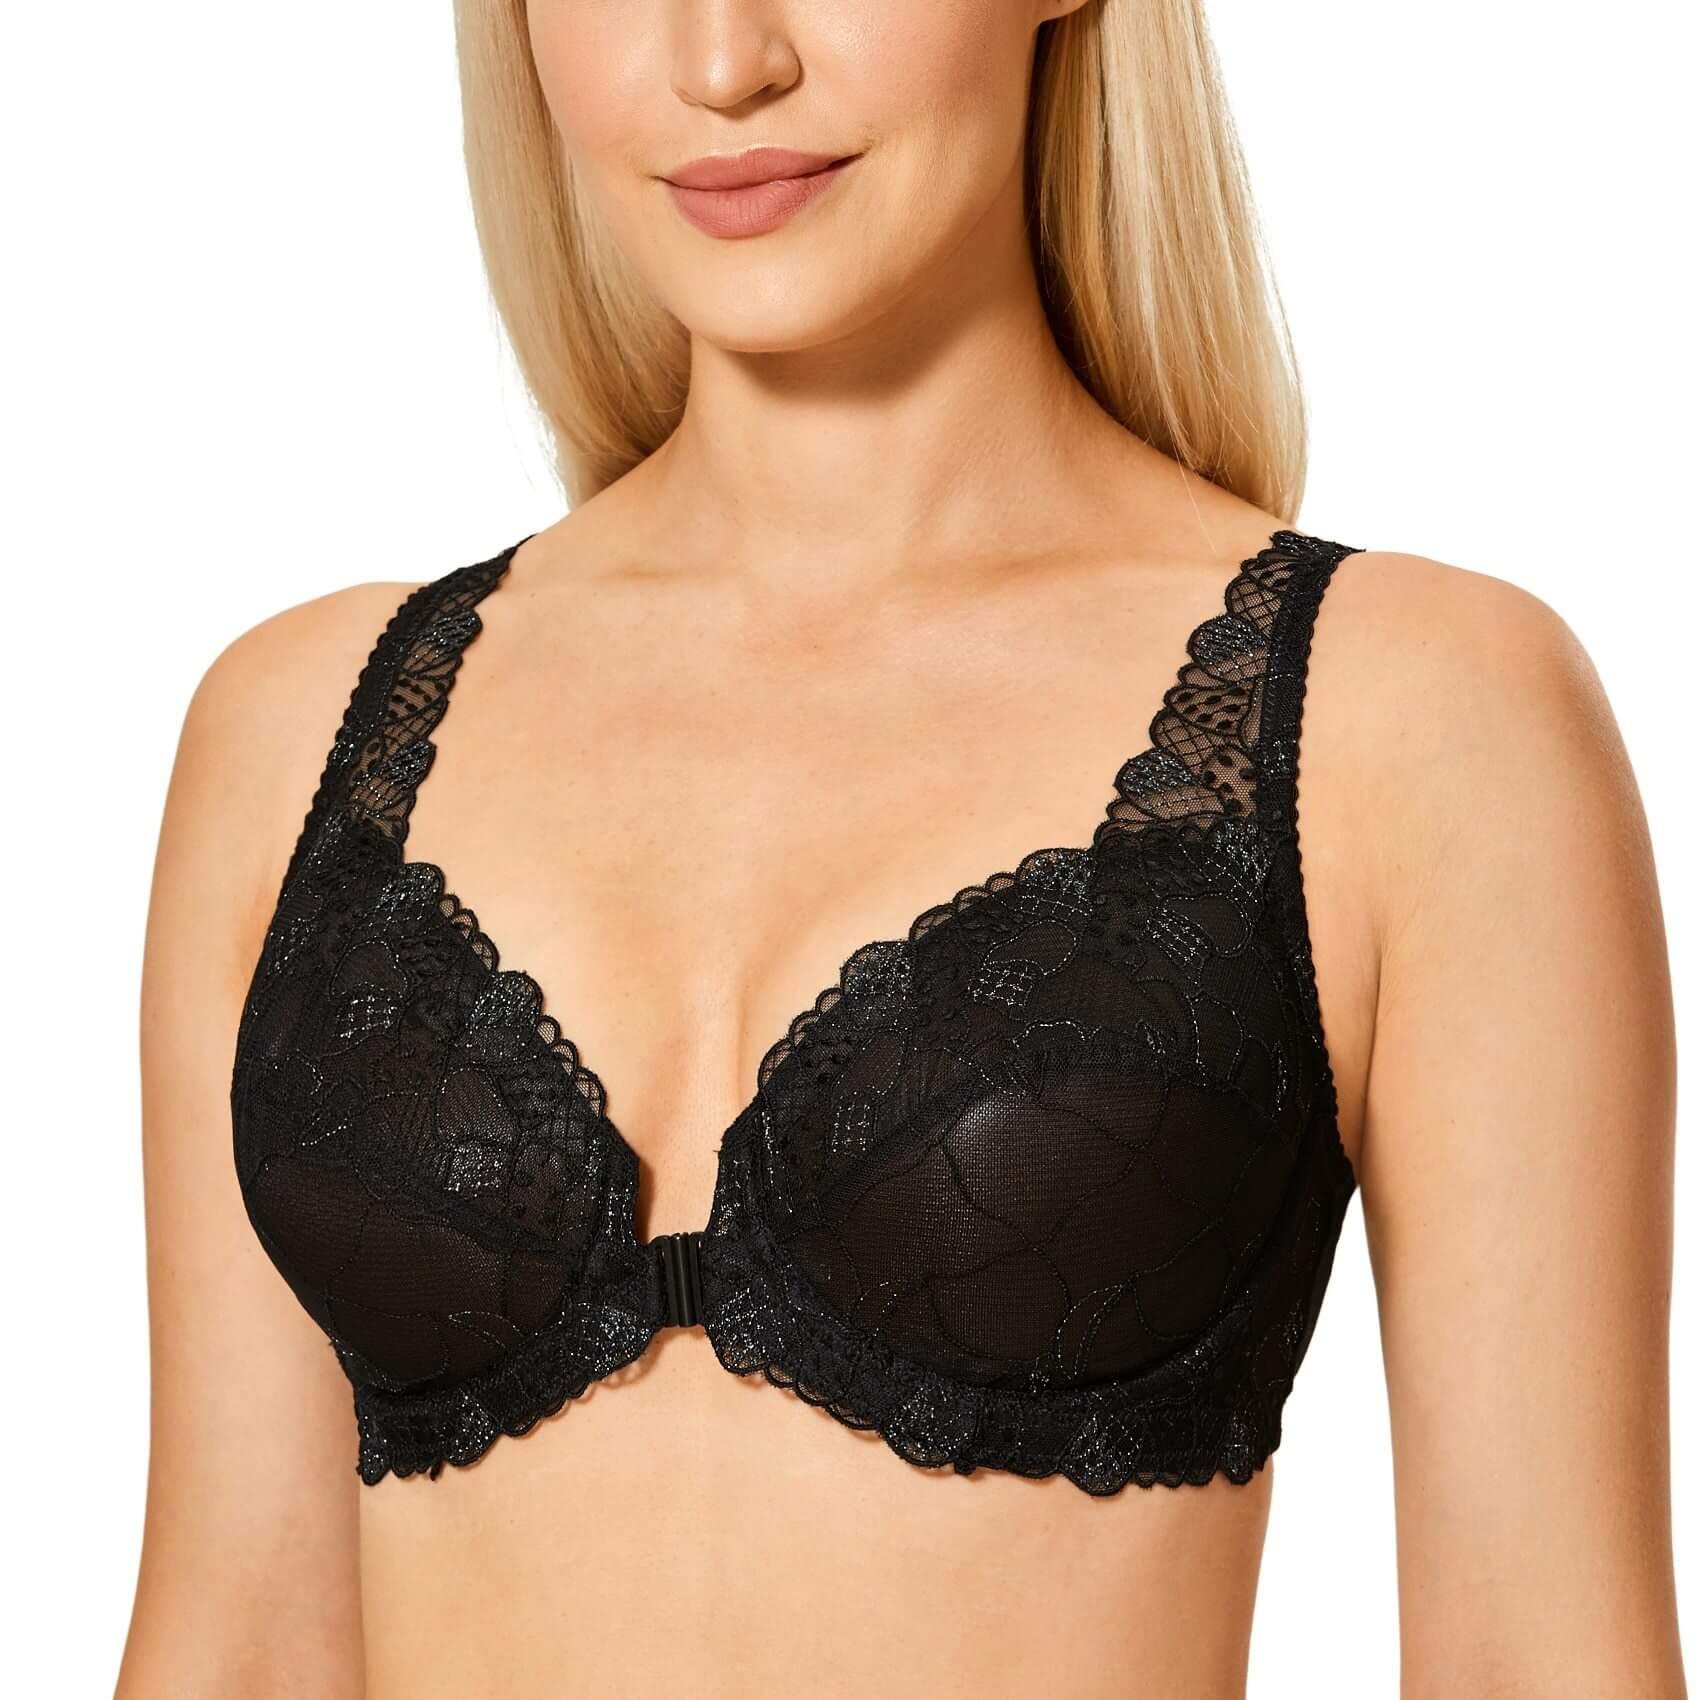 Vassarette - Maximize every outfit with our Lace & Lift bra. Not